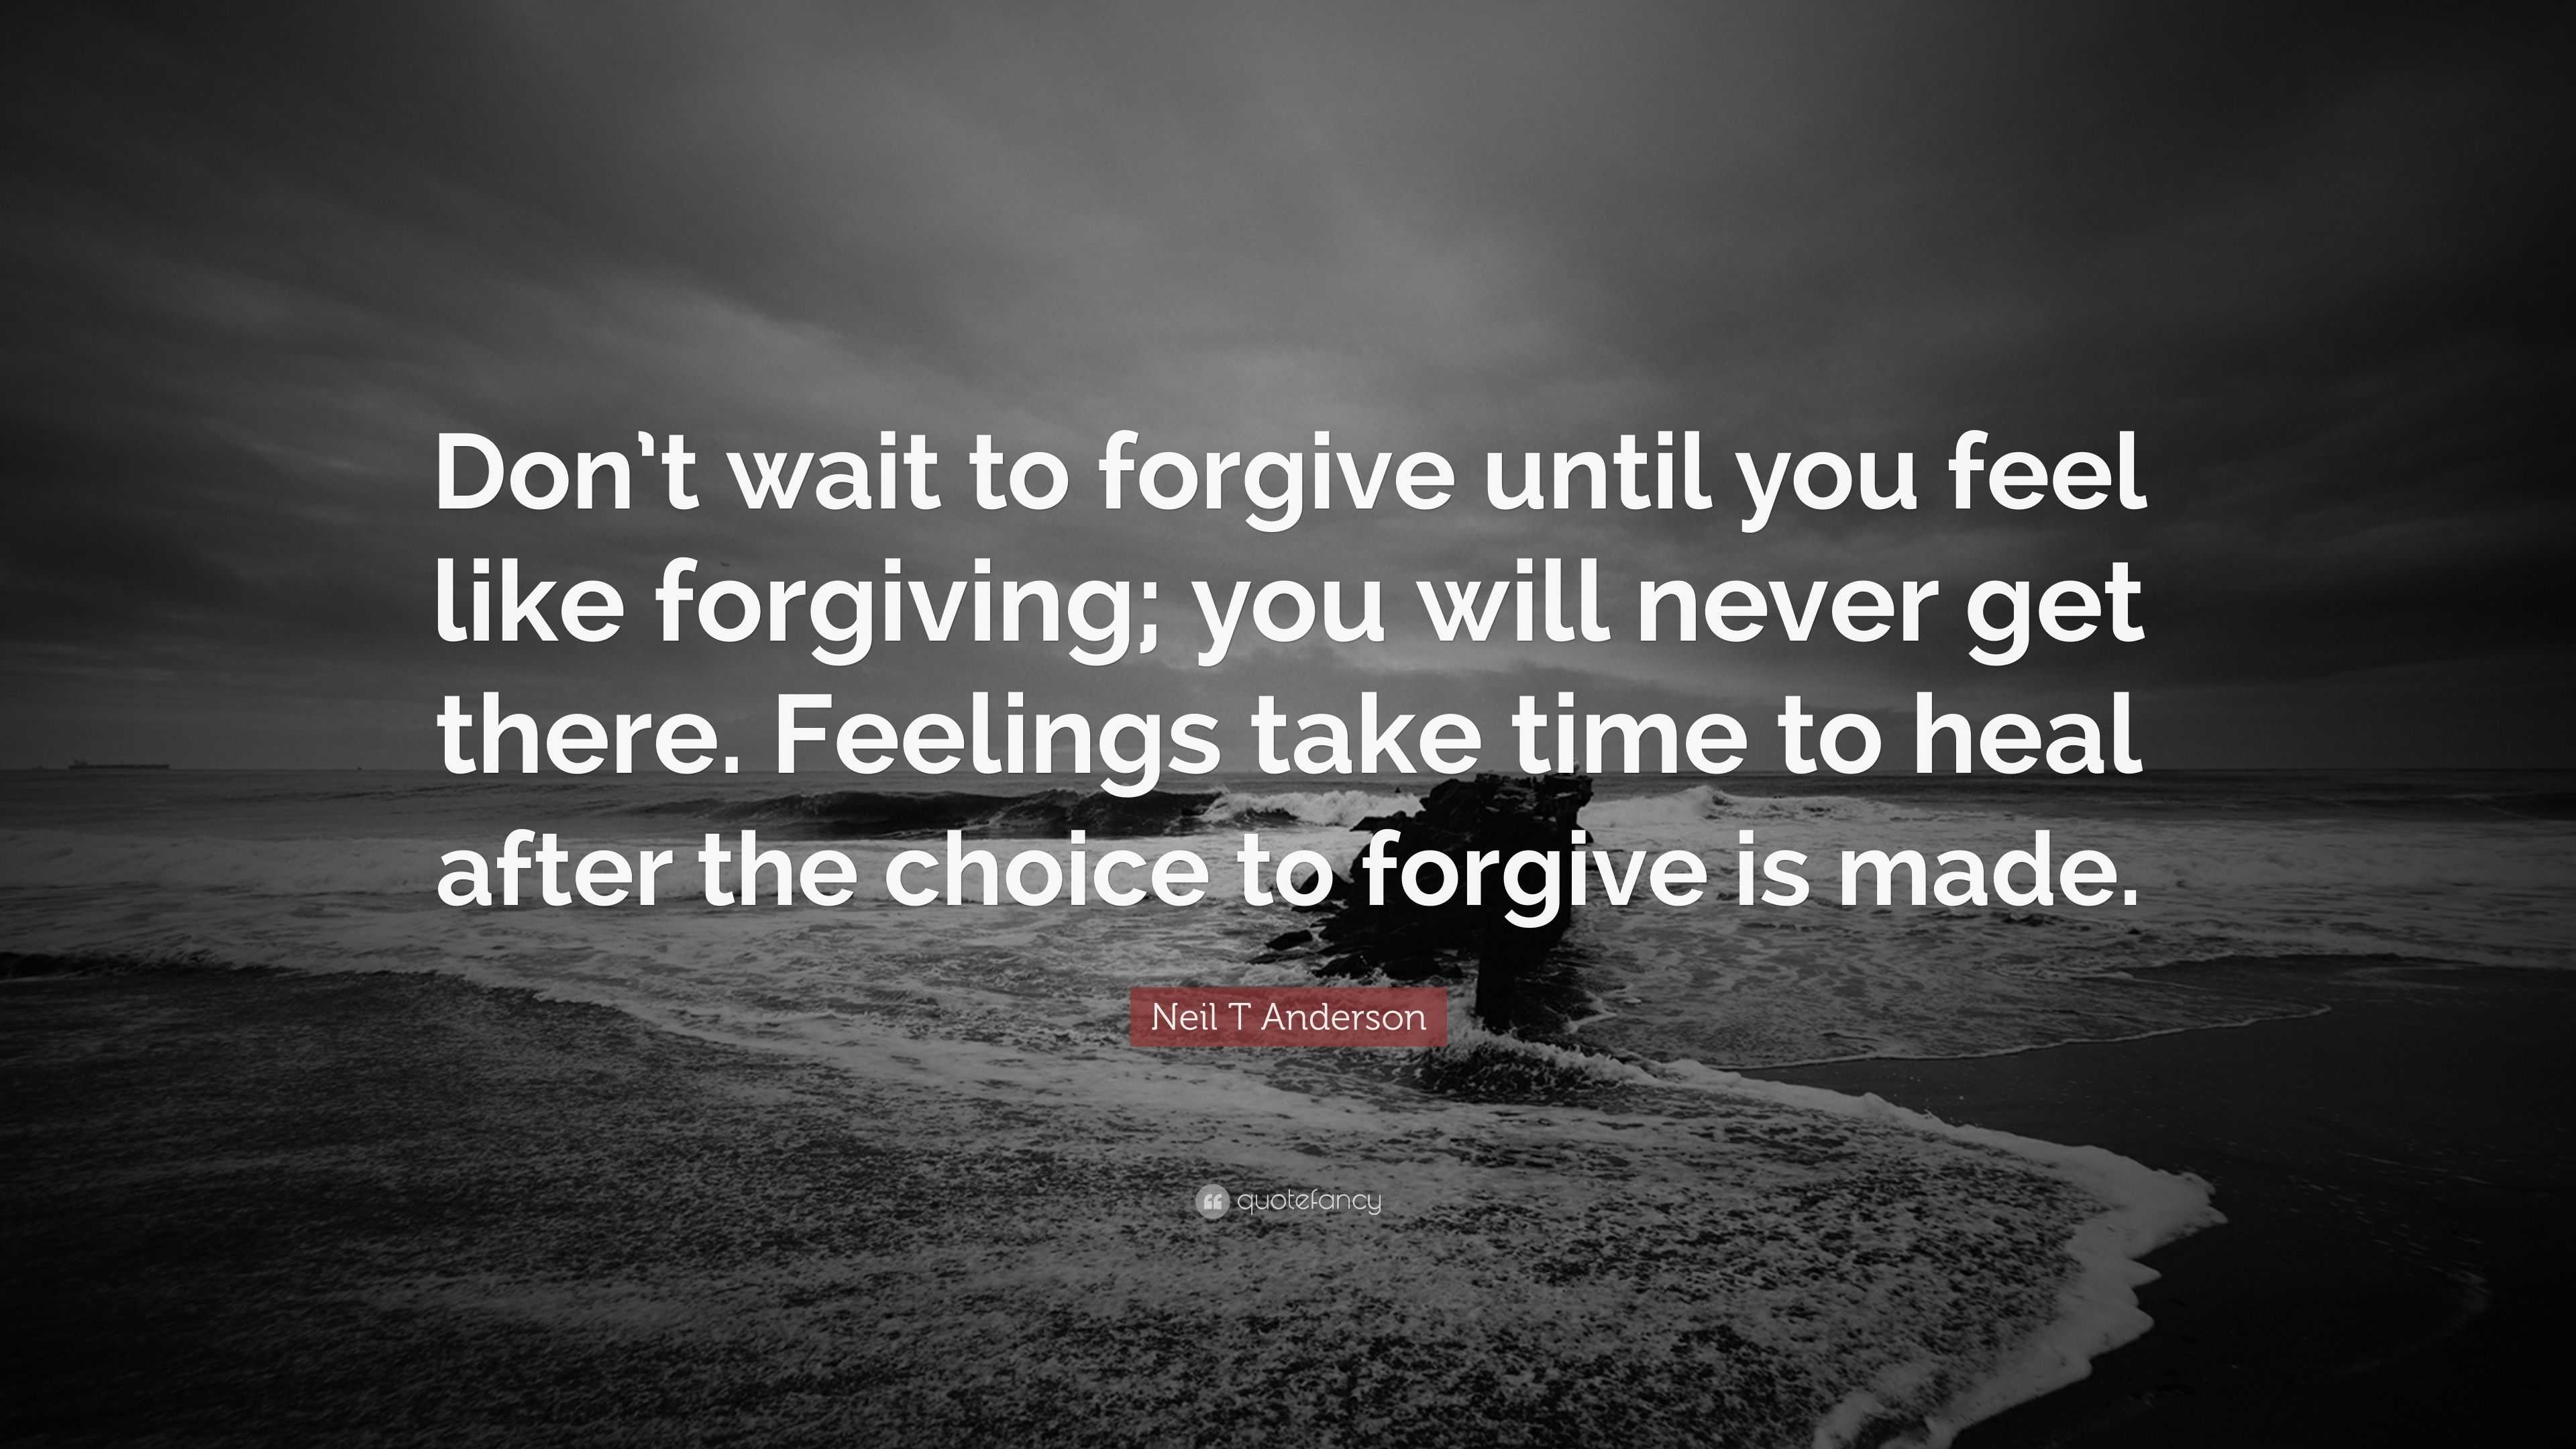 Neil T Anderson Quote: “don’t Wait To Forgive Until You Feel Like 